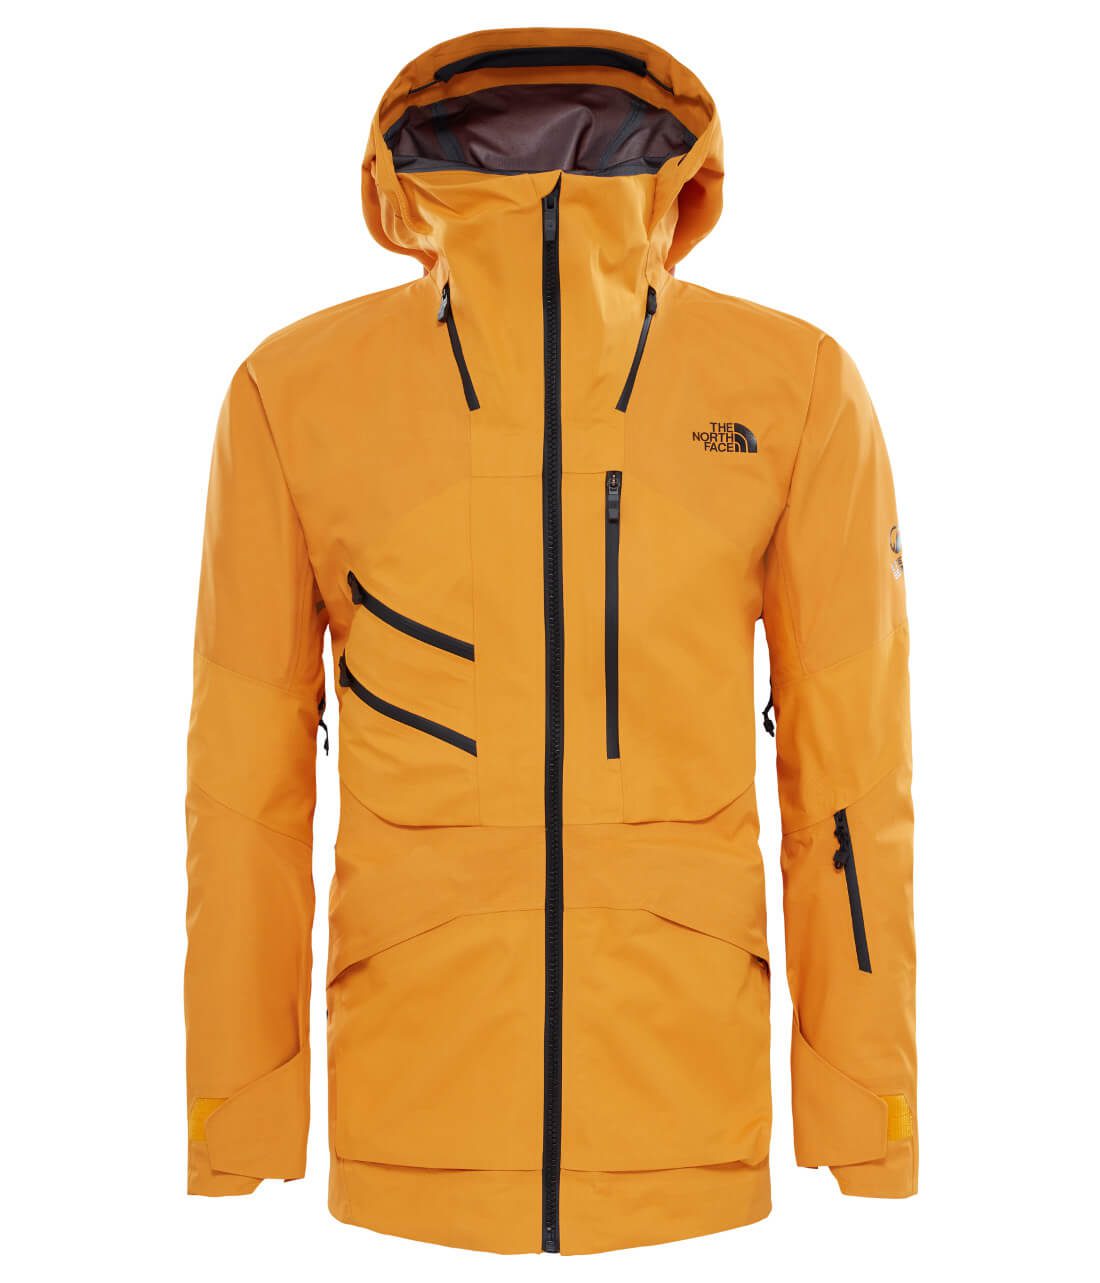 Getting steep with The North Face - Ape to Gentleman